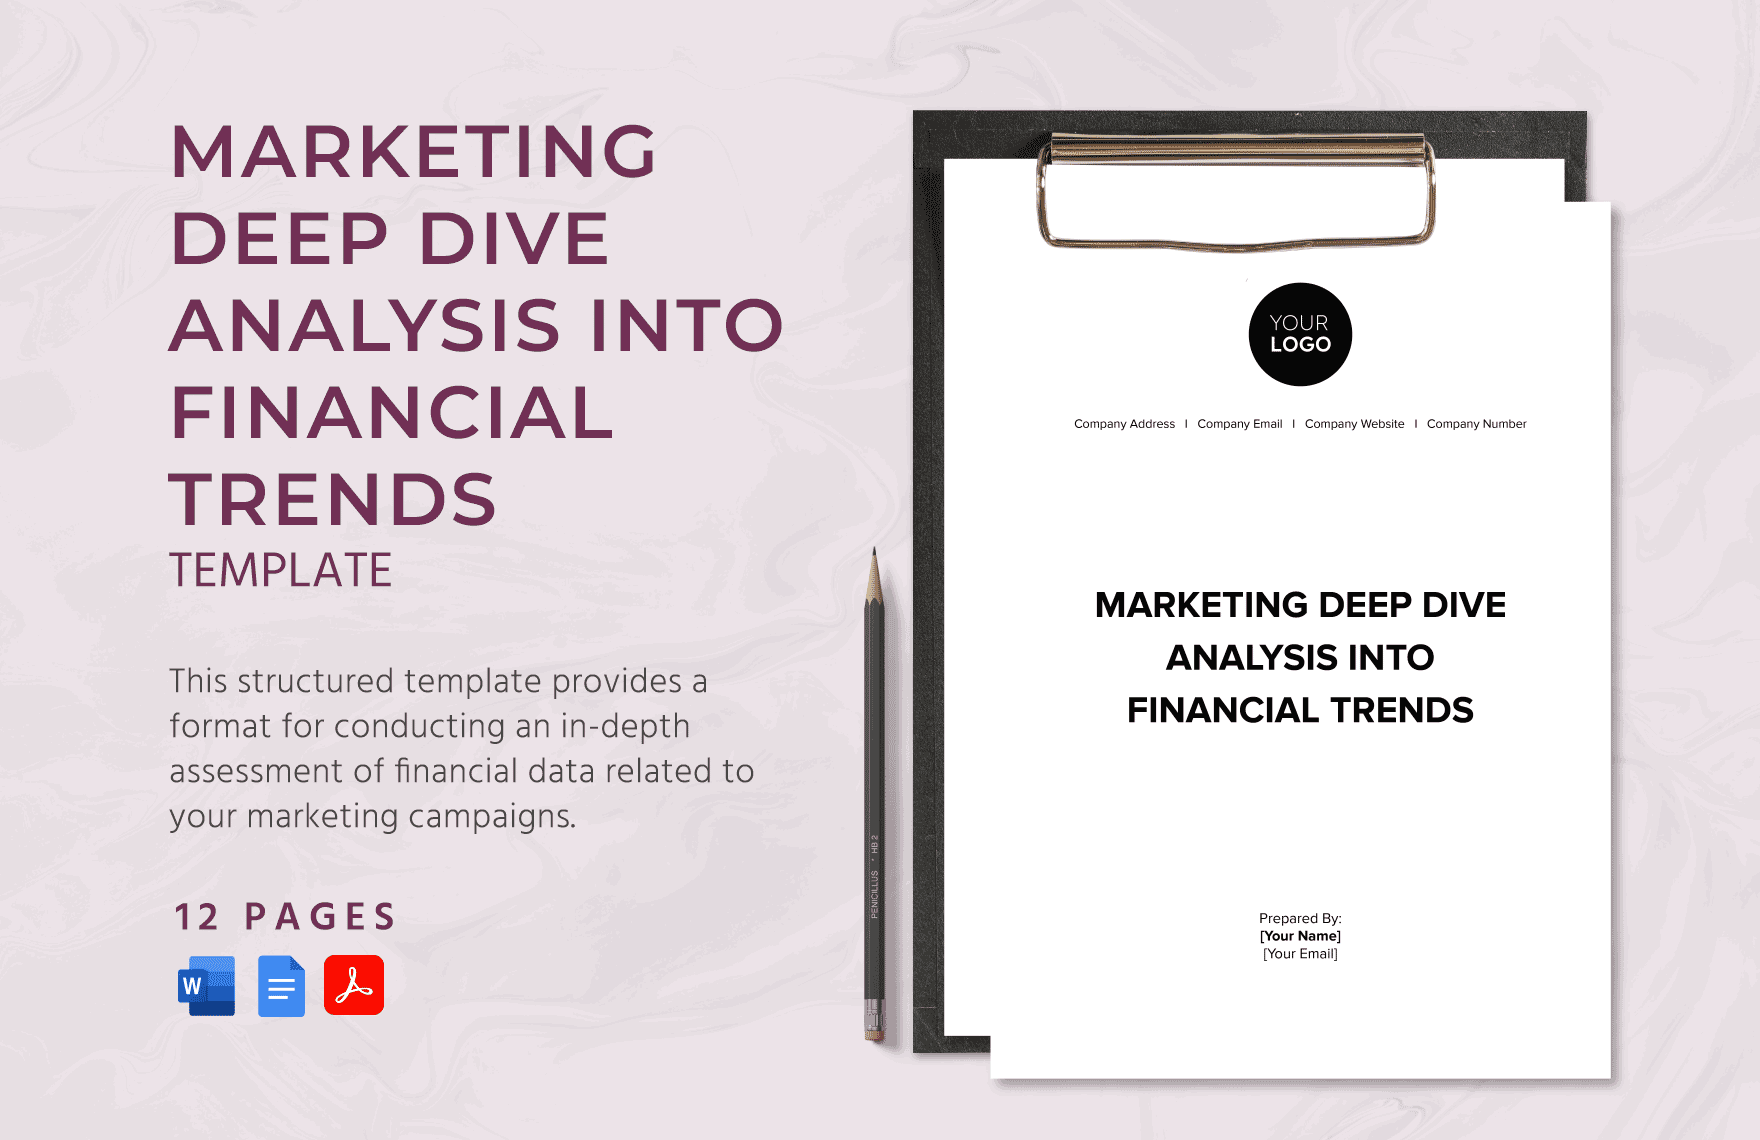 Marketing Deep Dive Analysis into Financial Trends Template